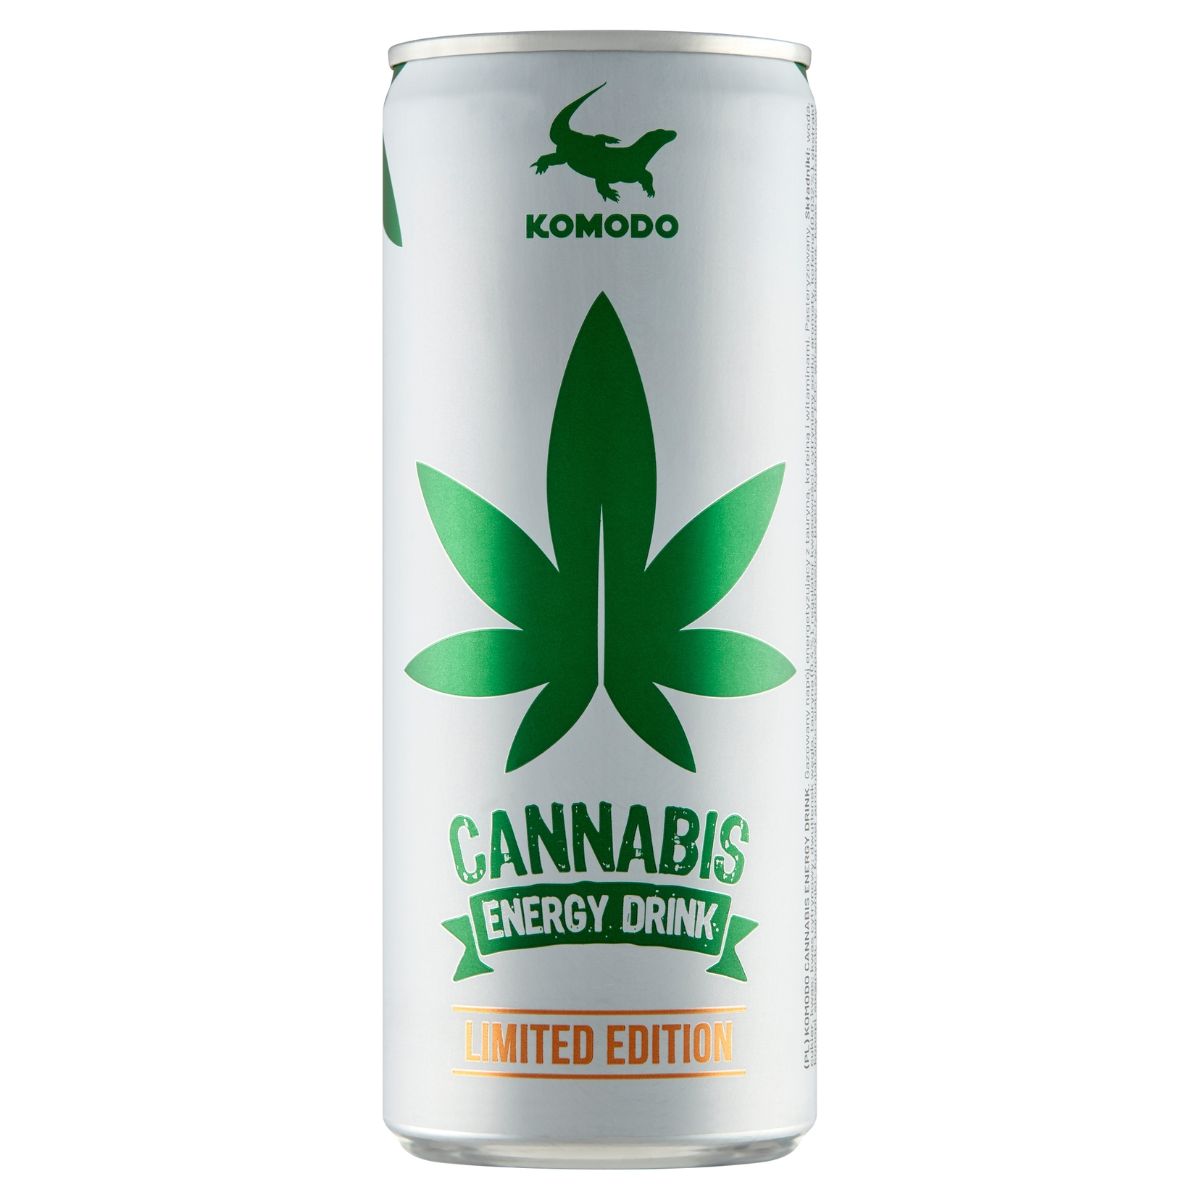 A can of Komodo - Cannabis Drink - 250ml on a white background.